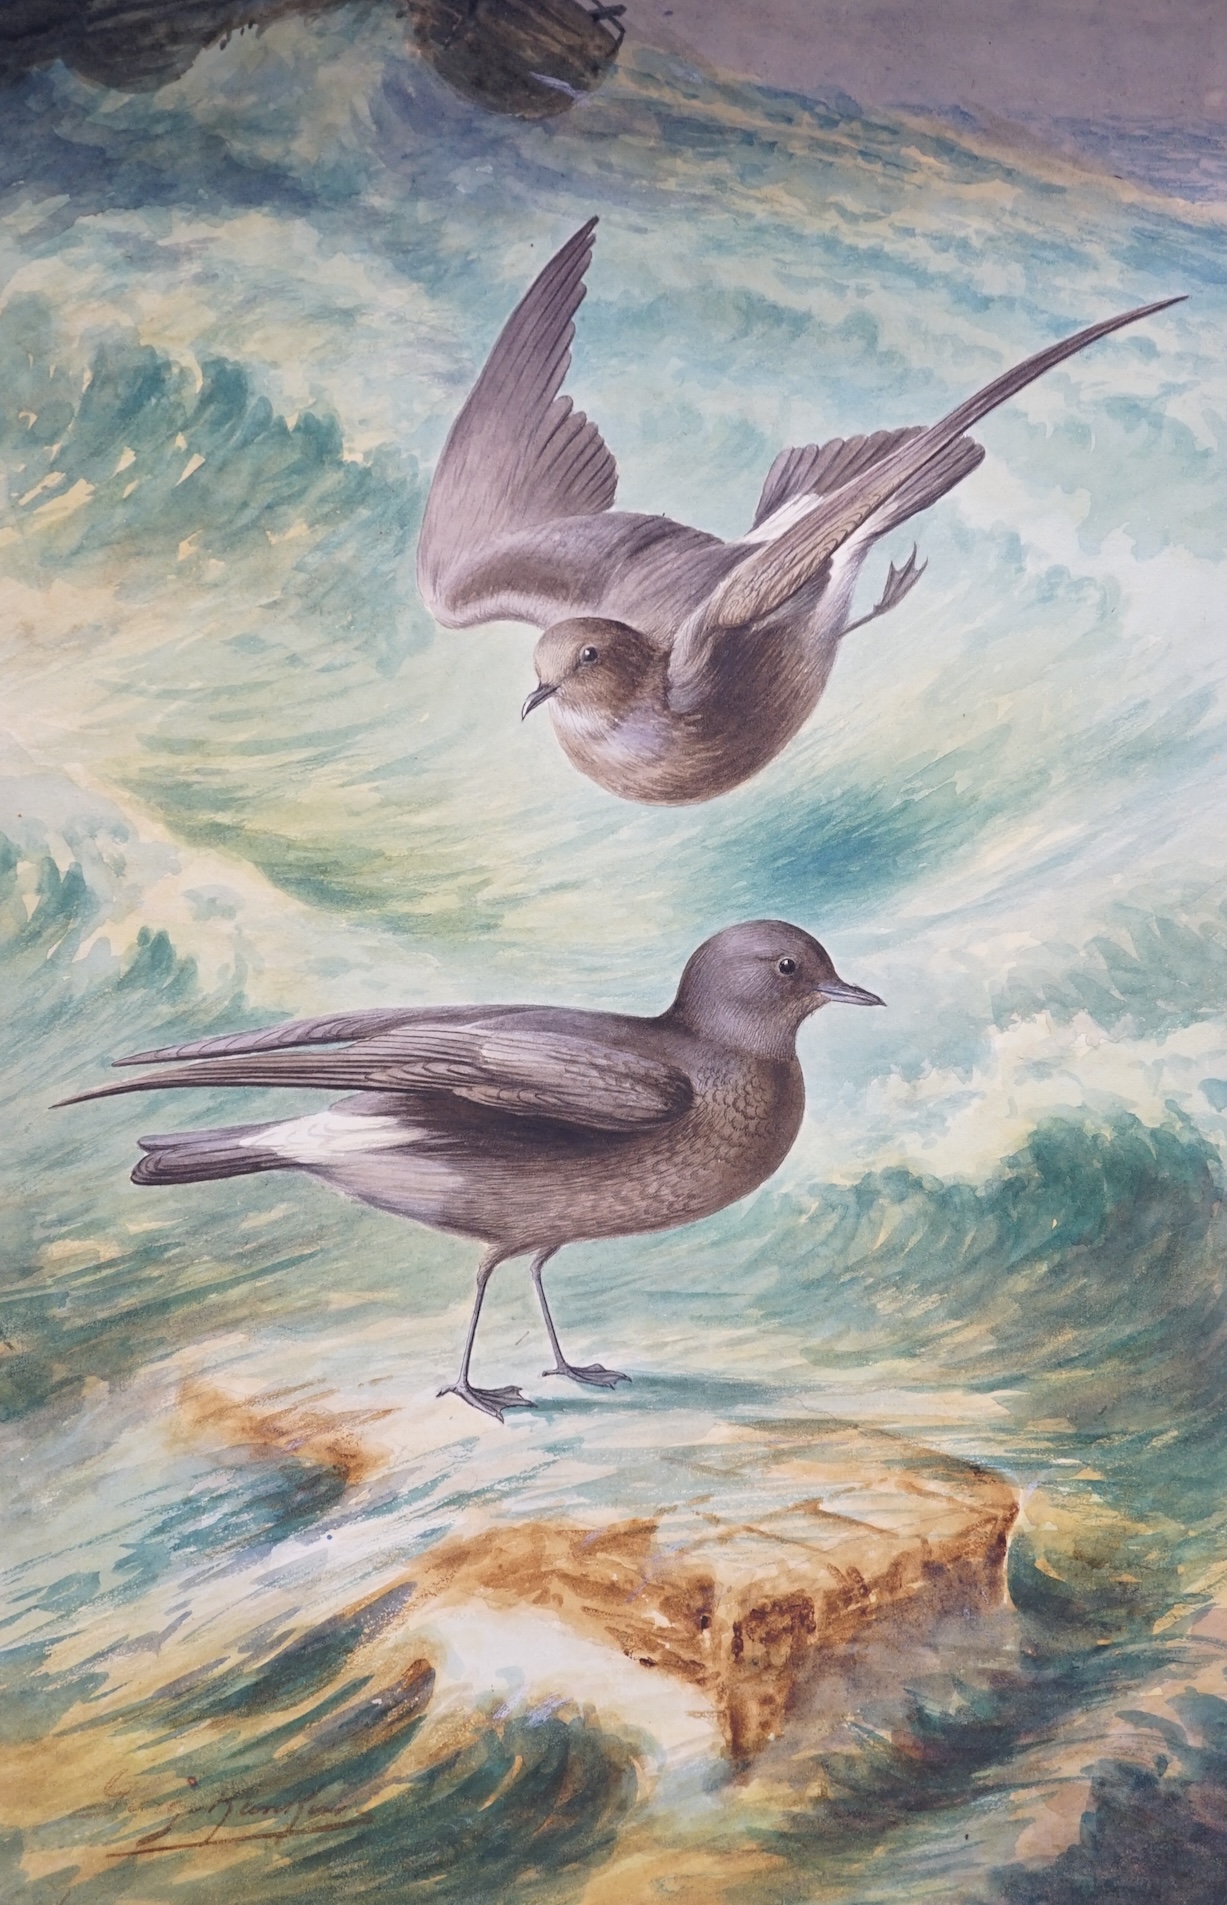 George Rankin (1864-1937), two watercolours on card, ‘Storm petrels’ and ‘Razorbills’, each signed, unframed, 46 x 29cm. Condition - fair to good